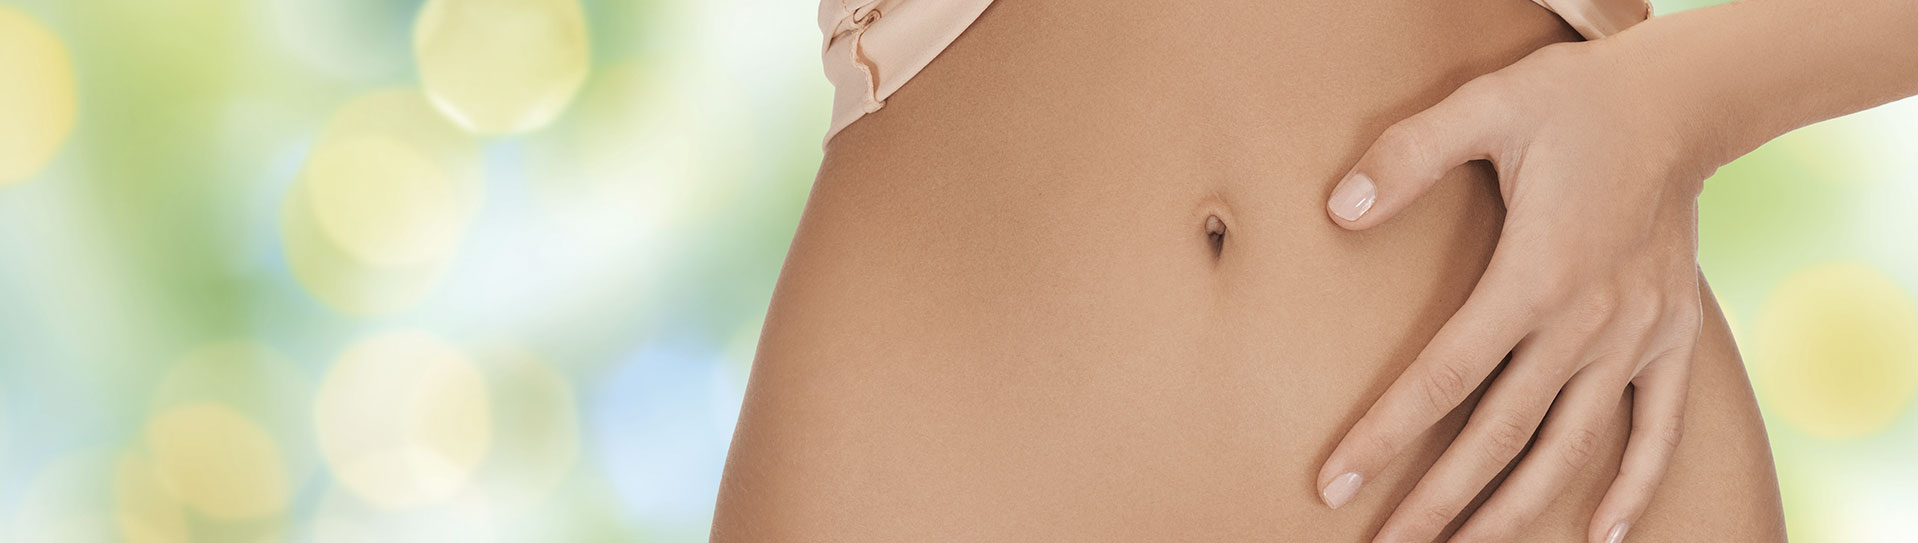 image of belly button